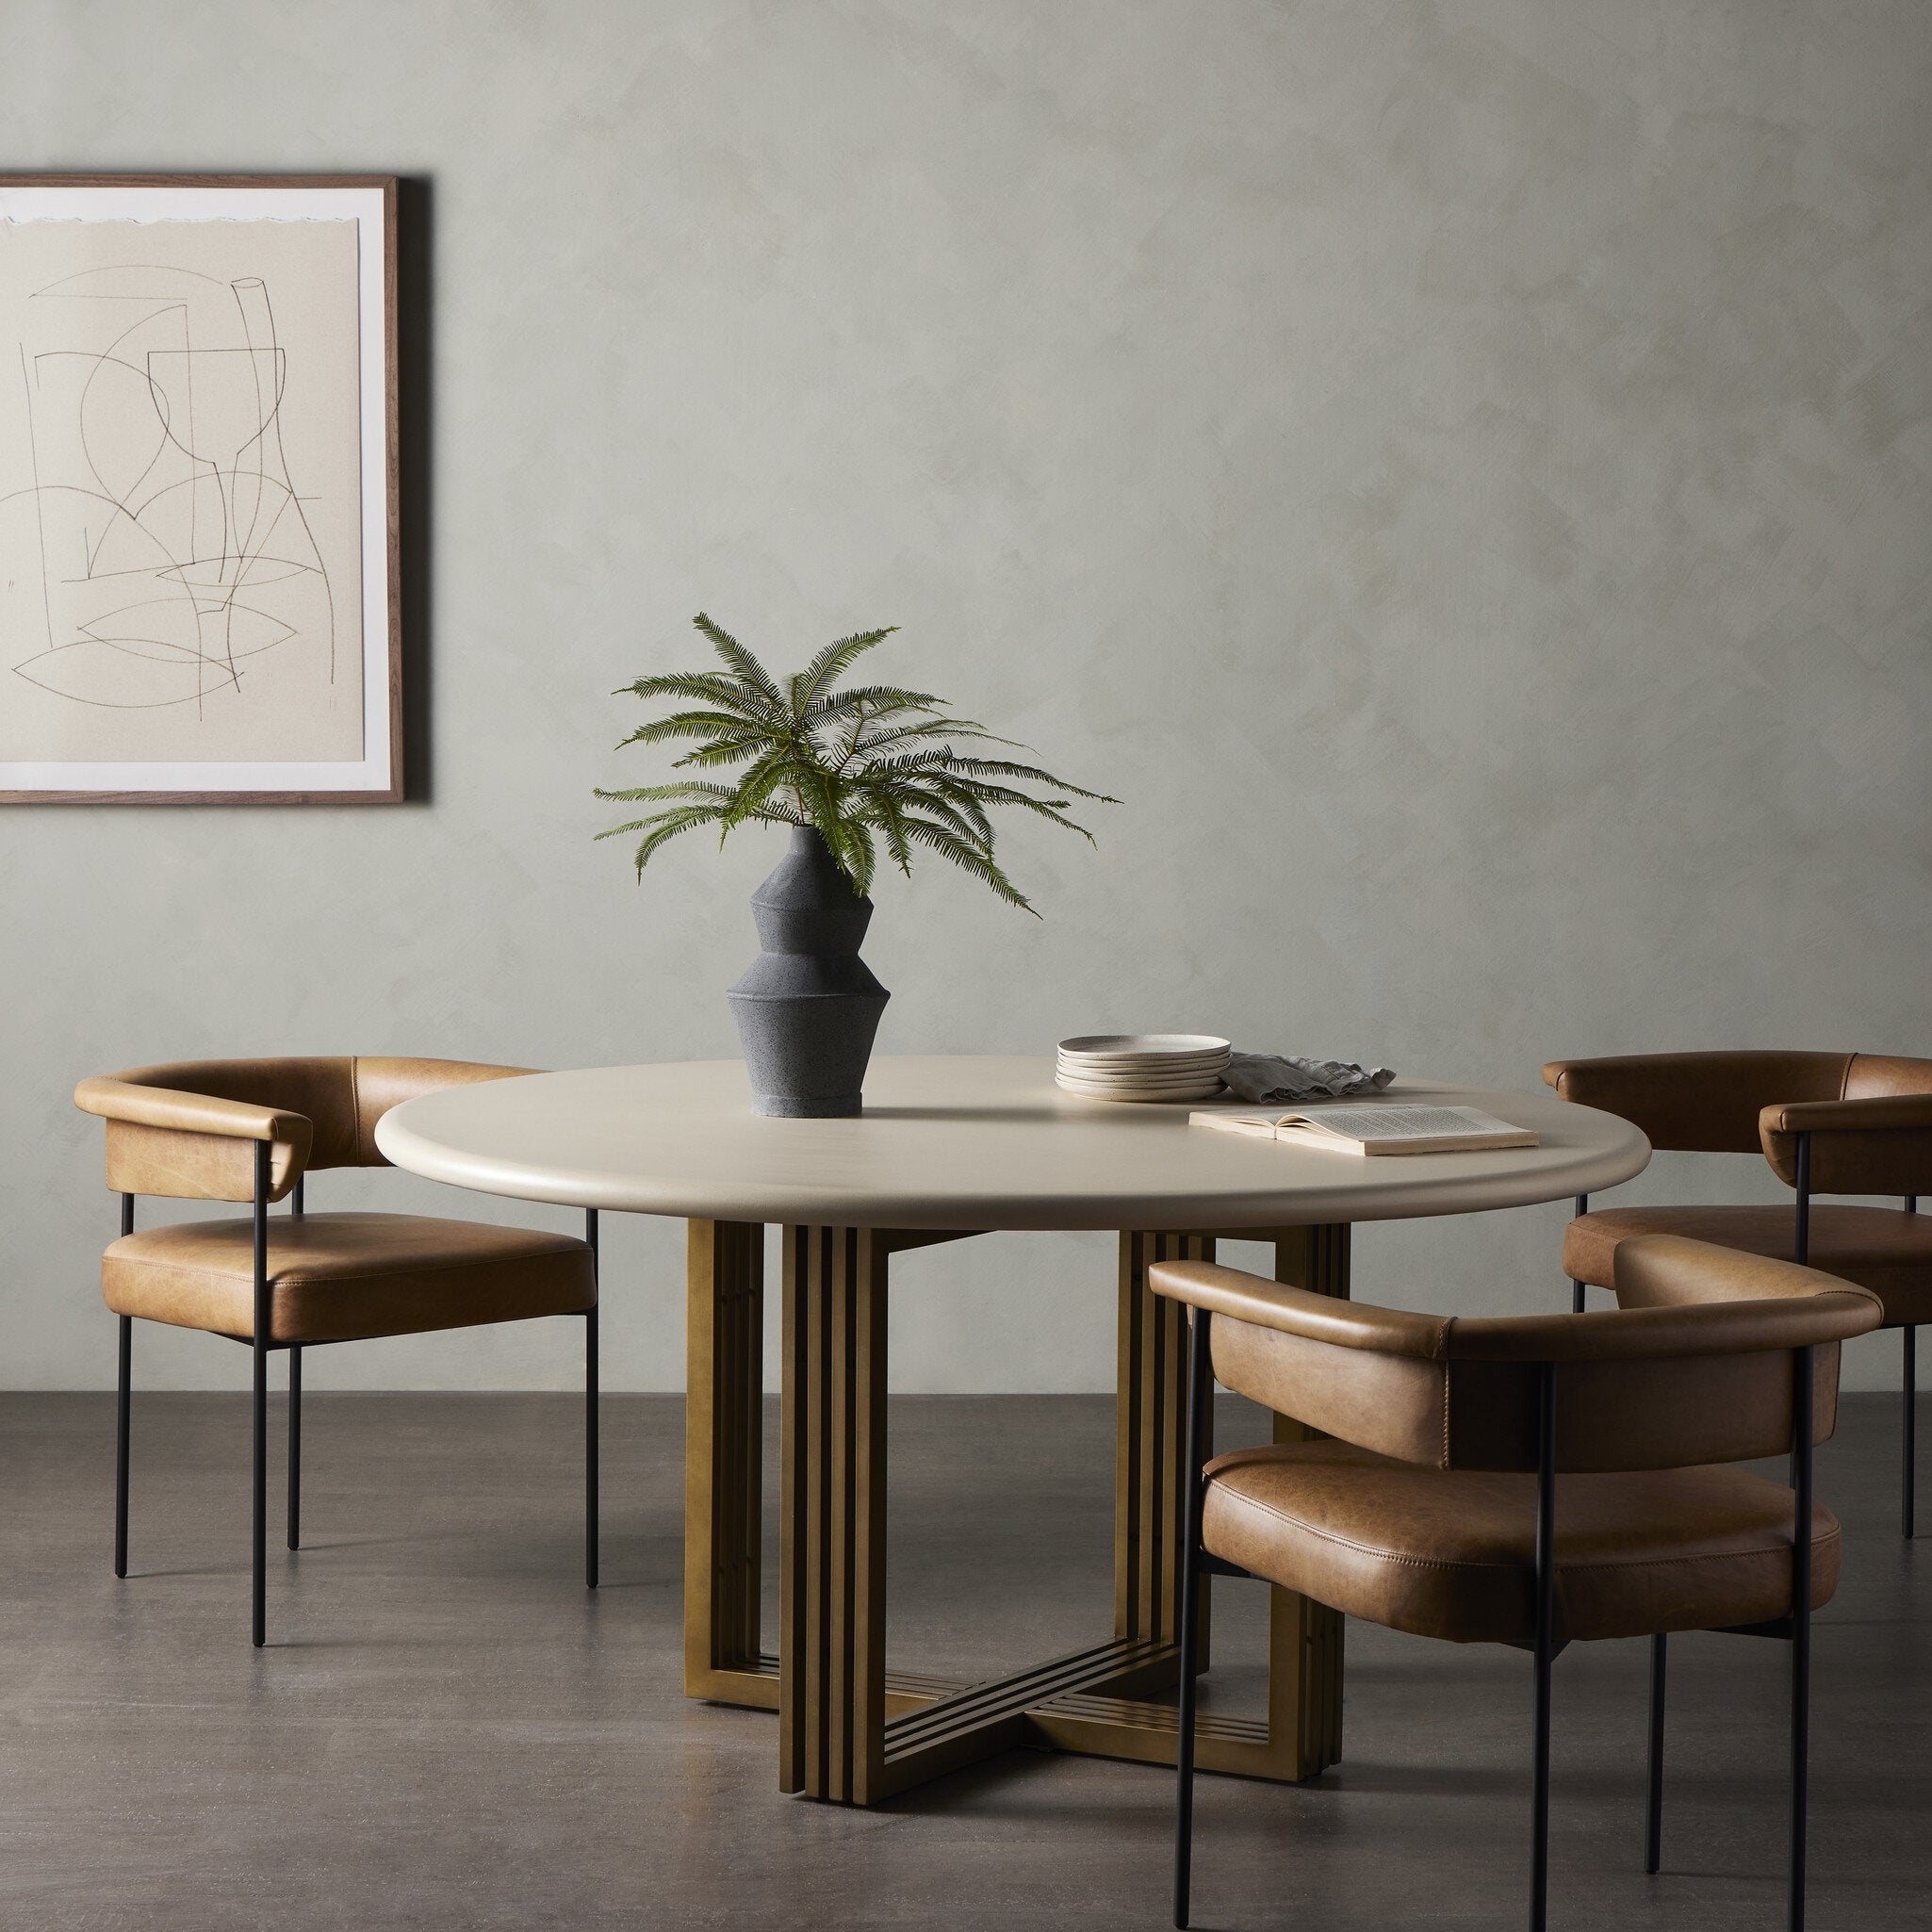 Mia Dining Table - Parchment White